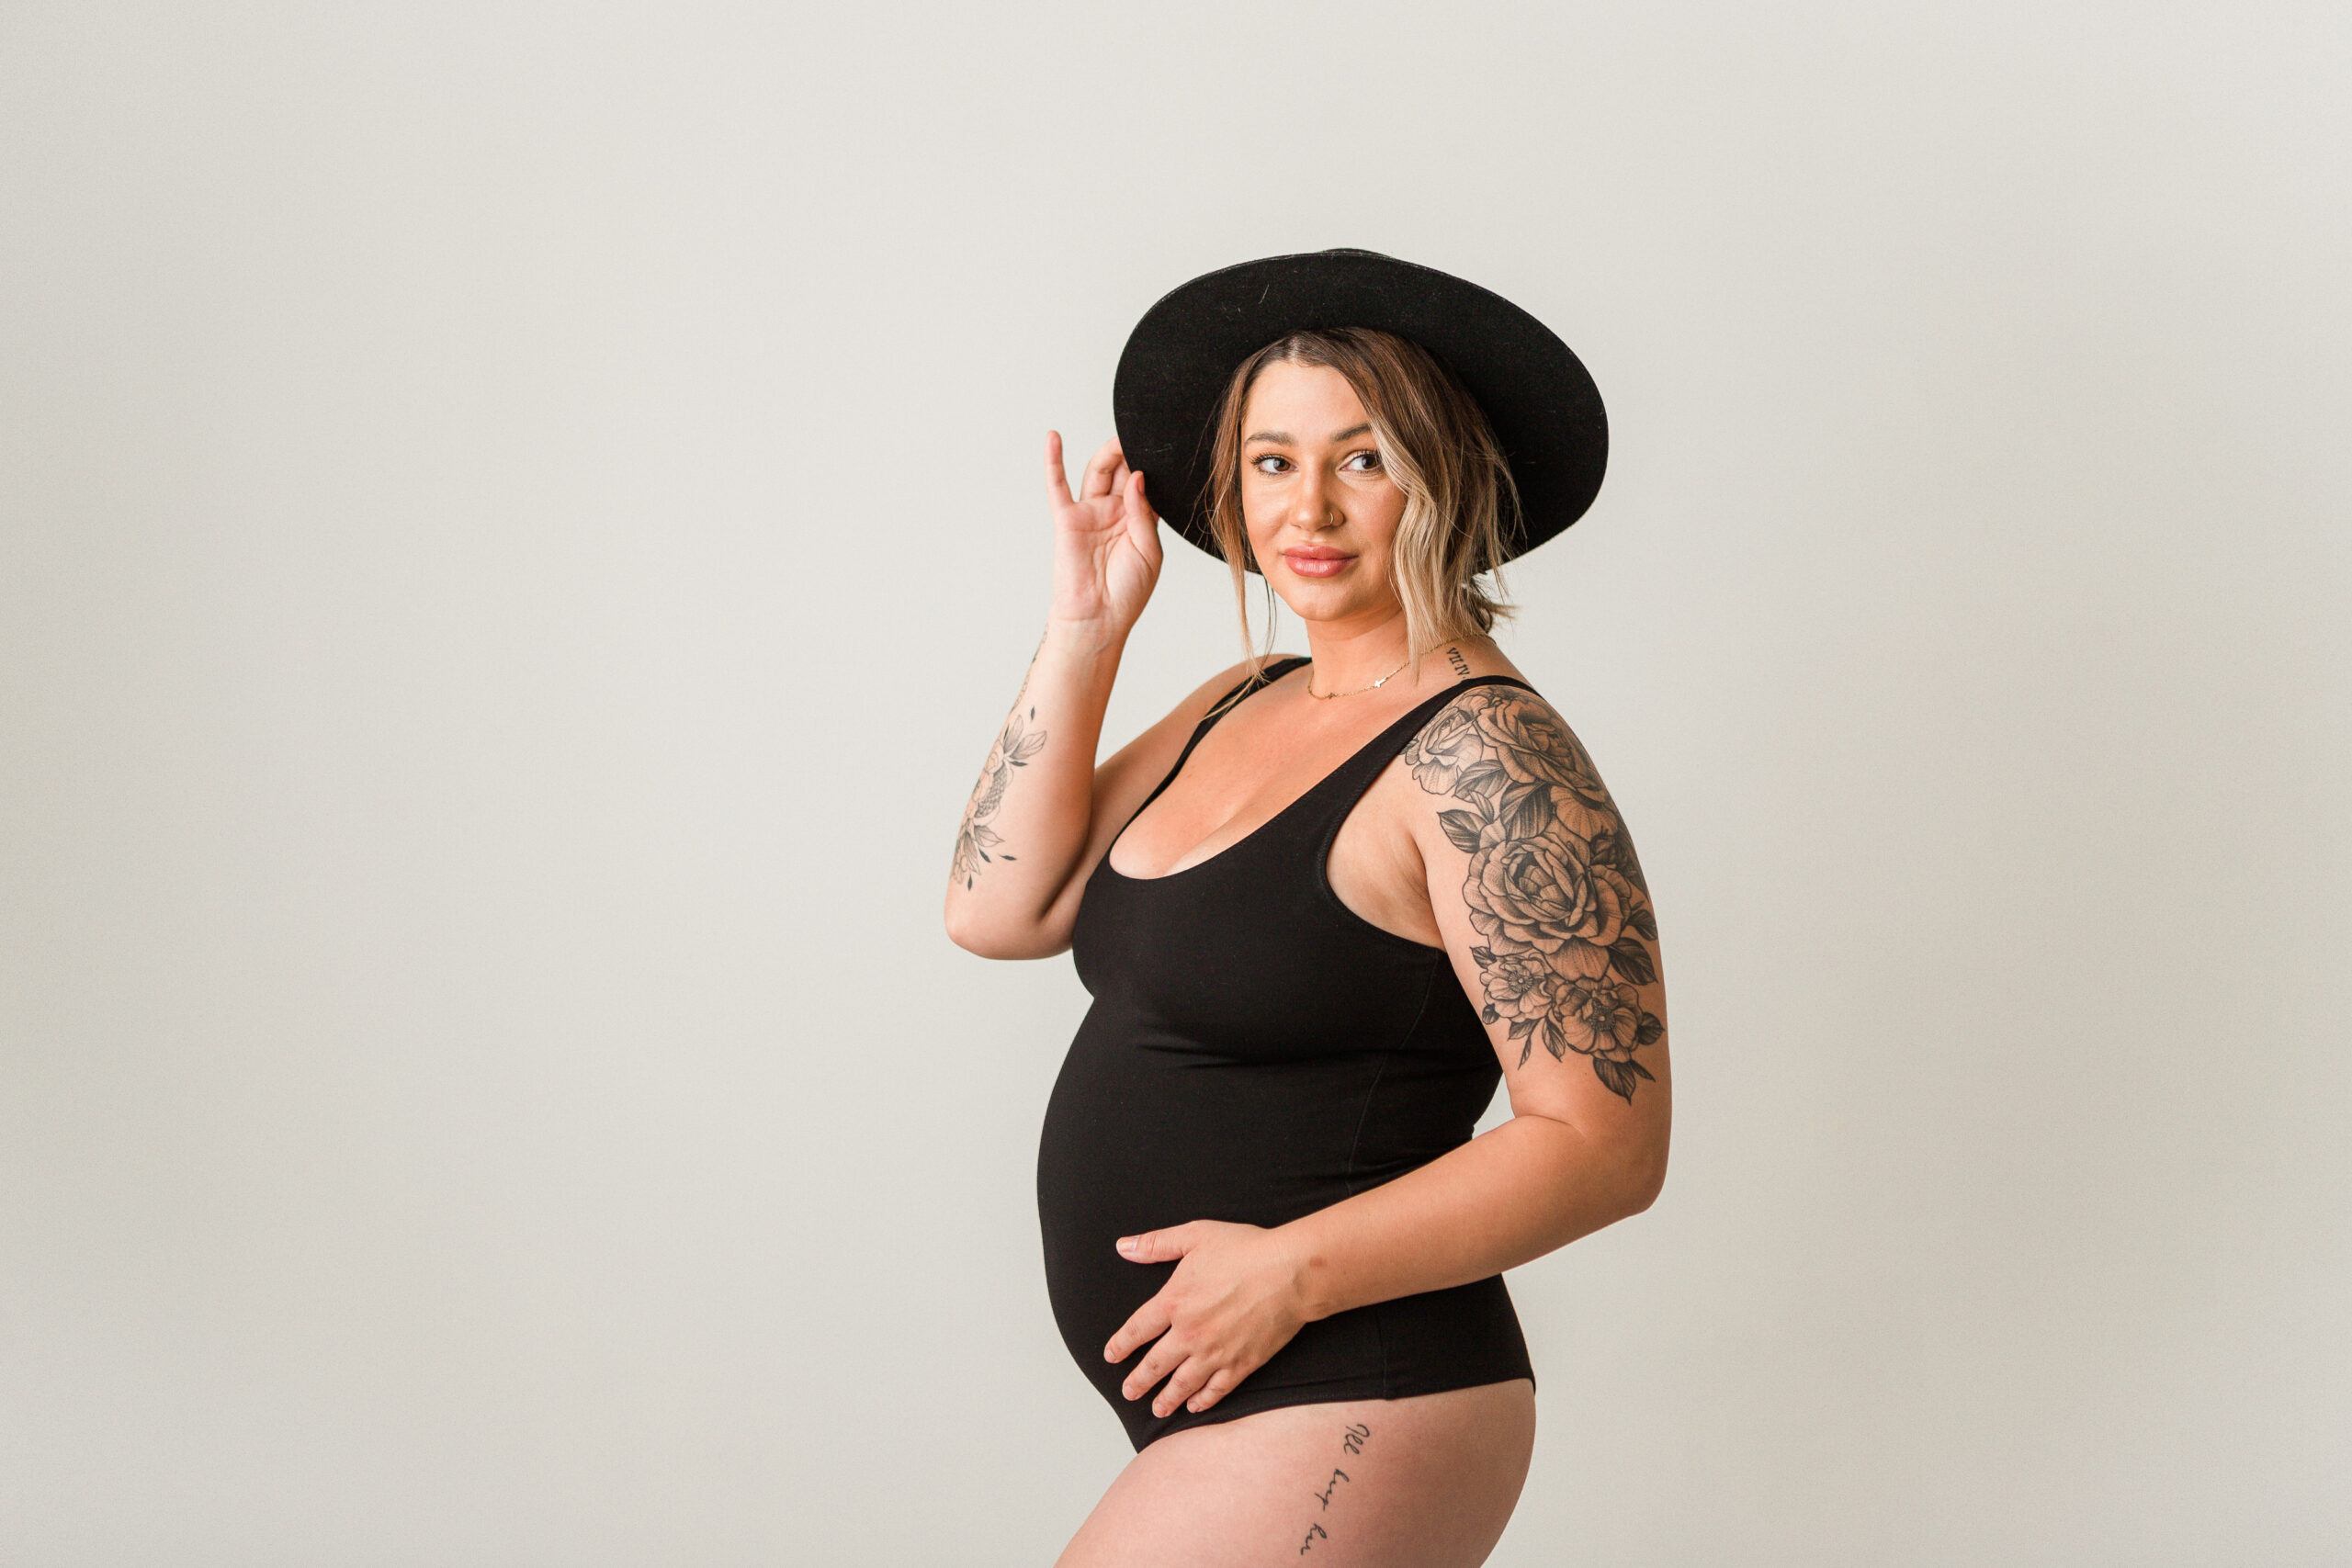 Professional Photographer for Your Maternity Journey